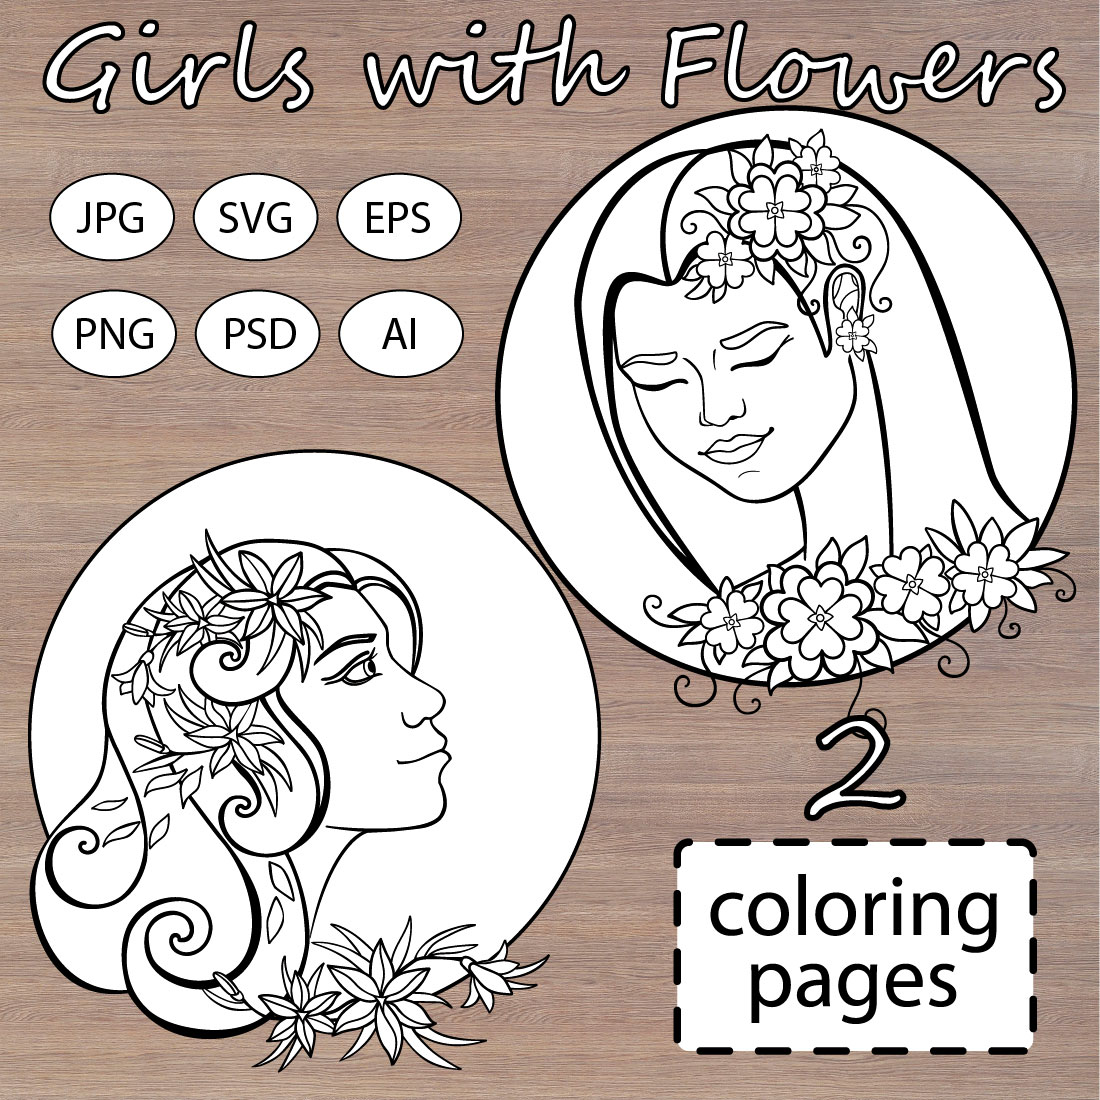 Girls with Flowers 2 coloring pages cover image.